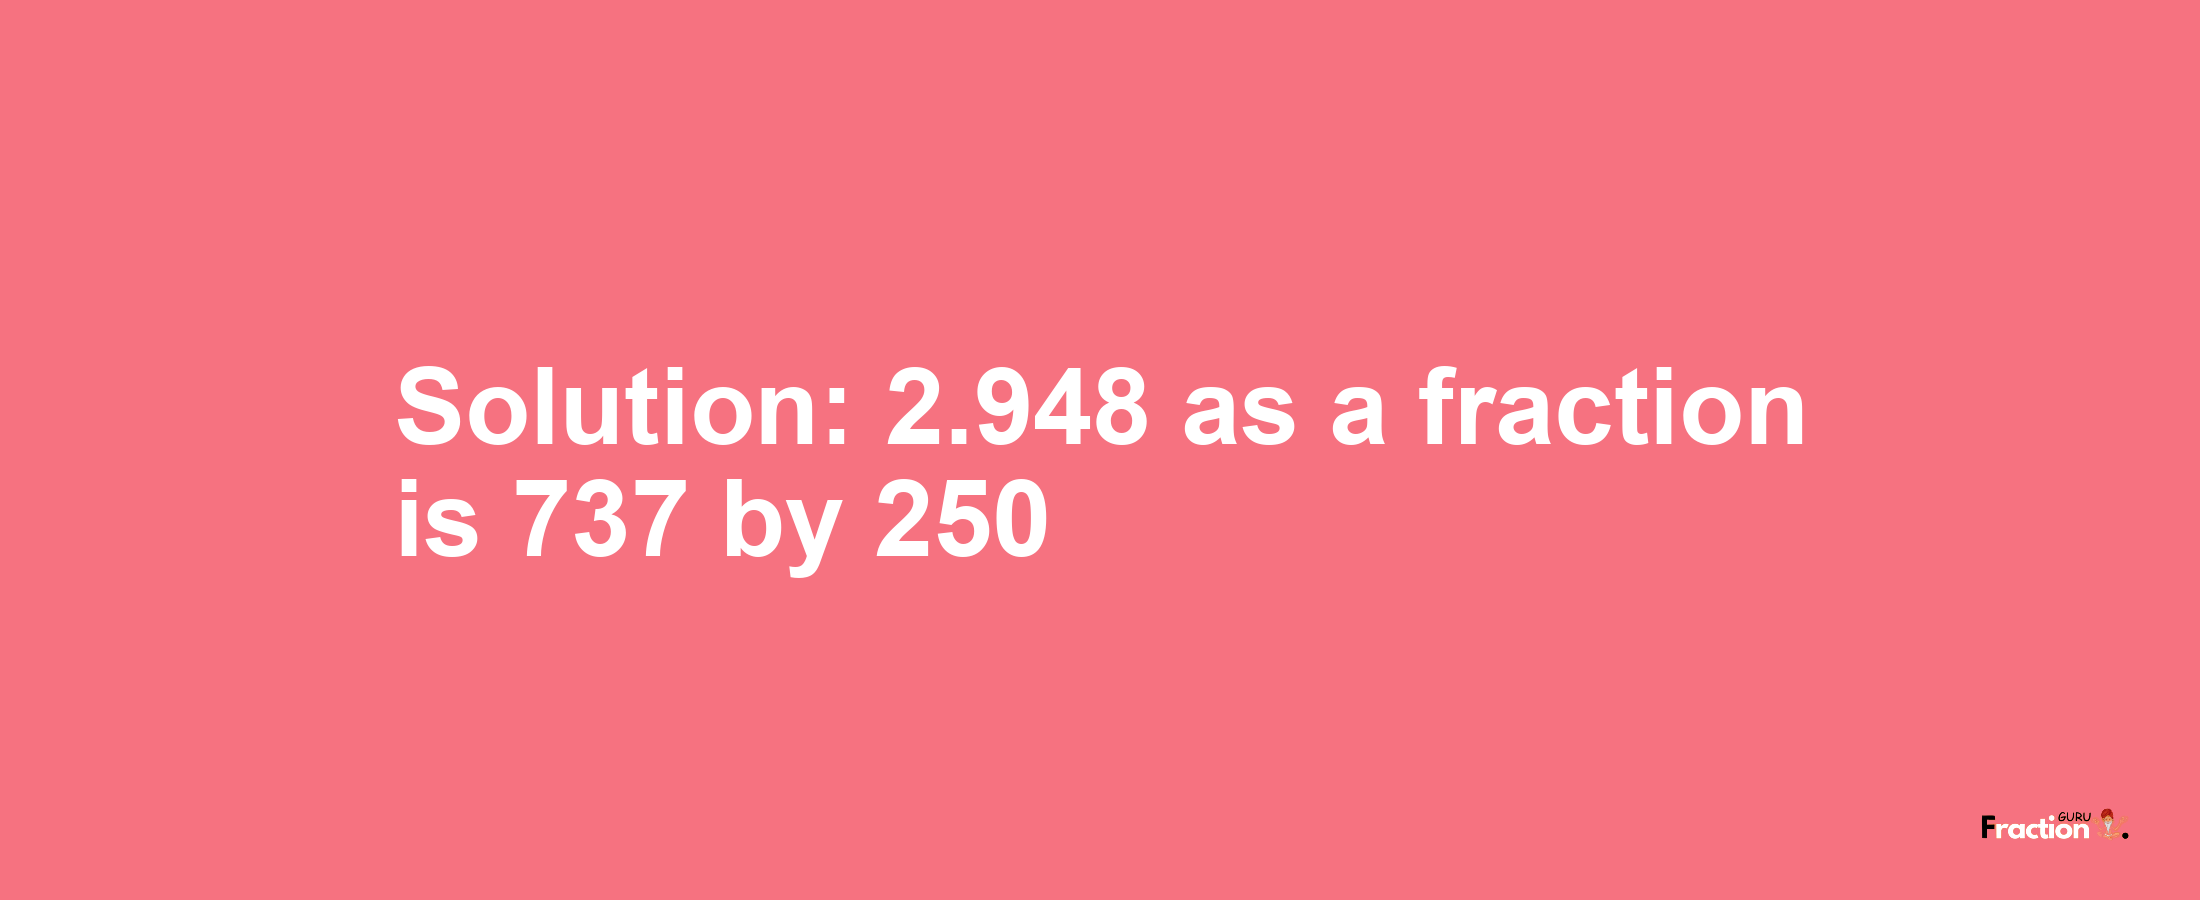 Solution:2.948 as a fraction is 737/250